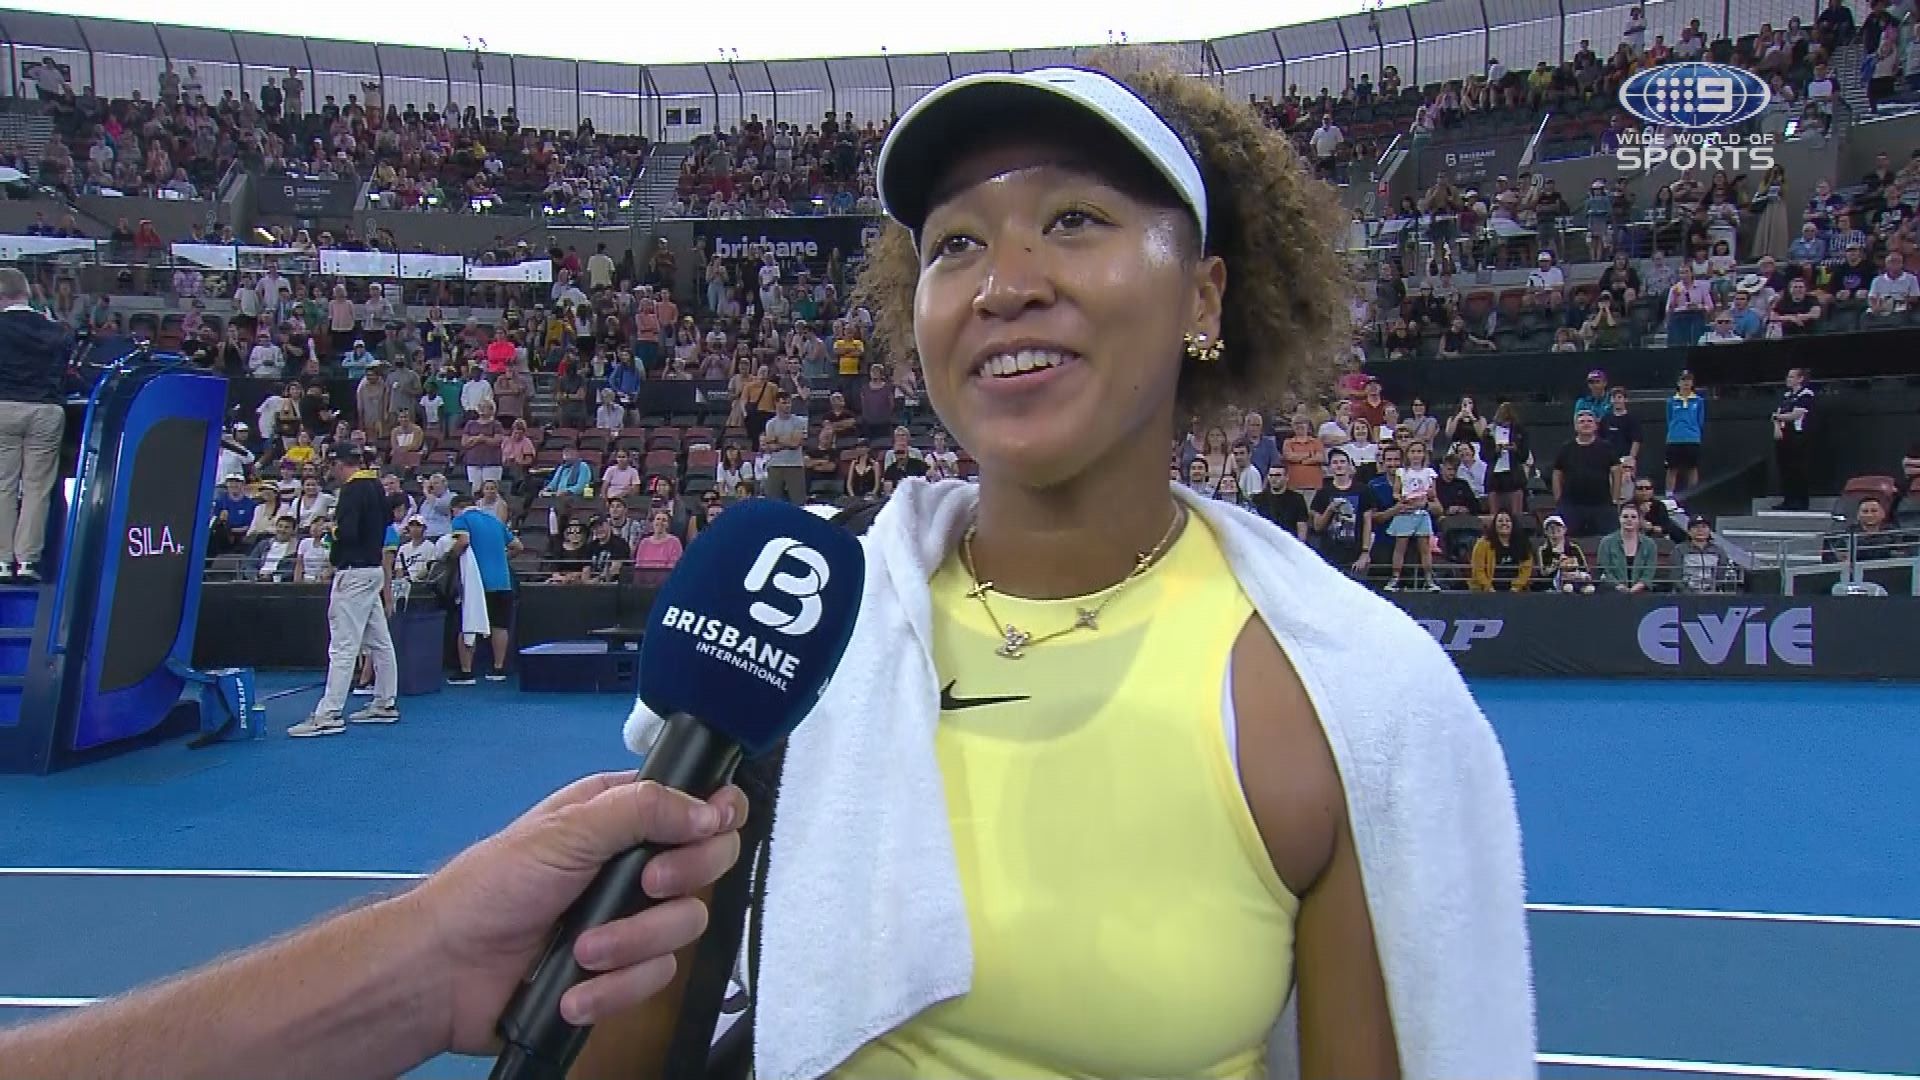 Naomi Osaka in her post-match interview after her first round win at the Brisbane International.